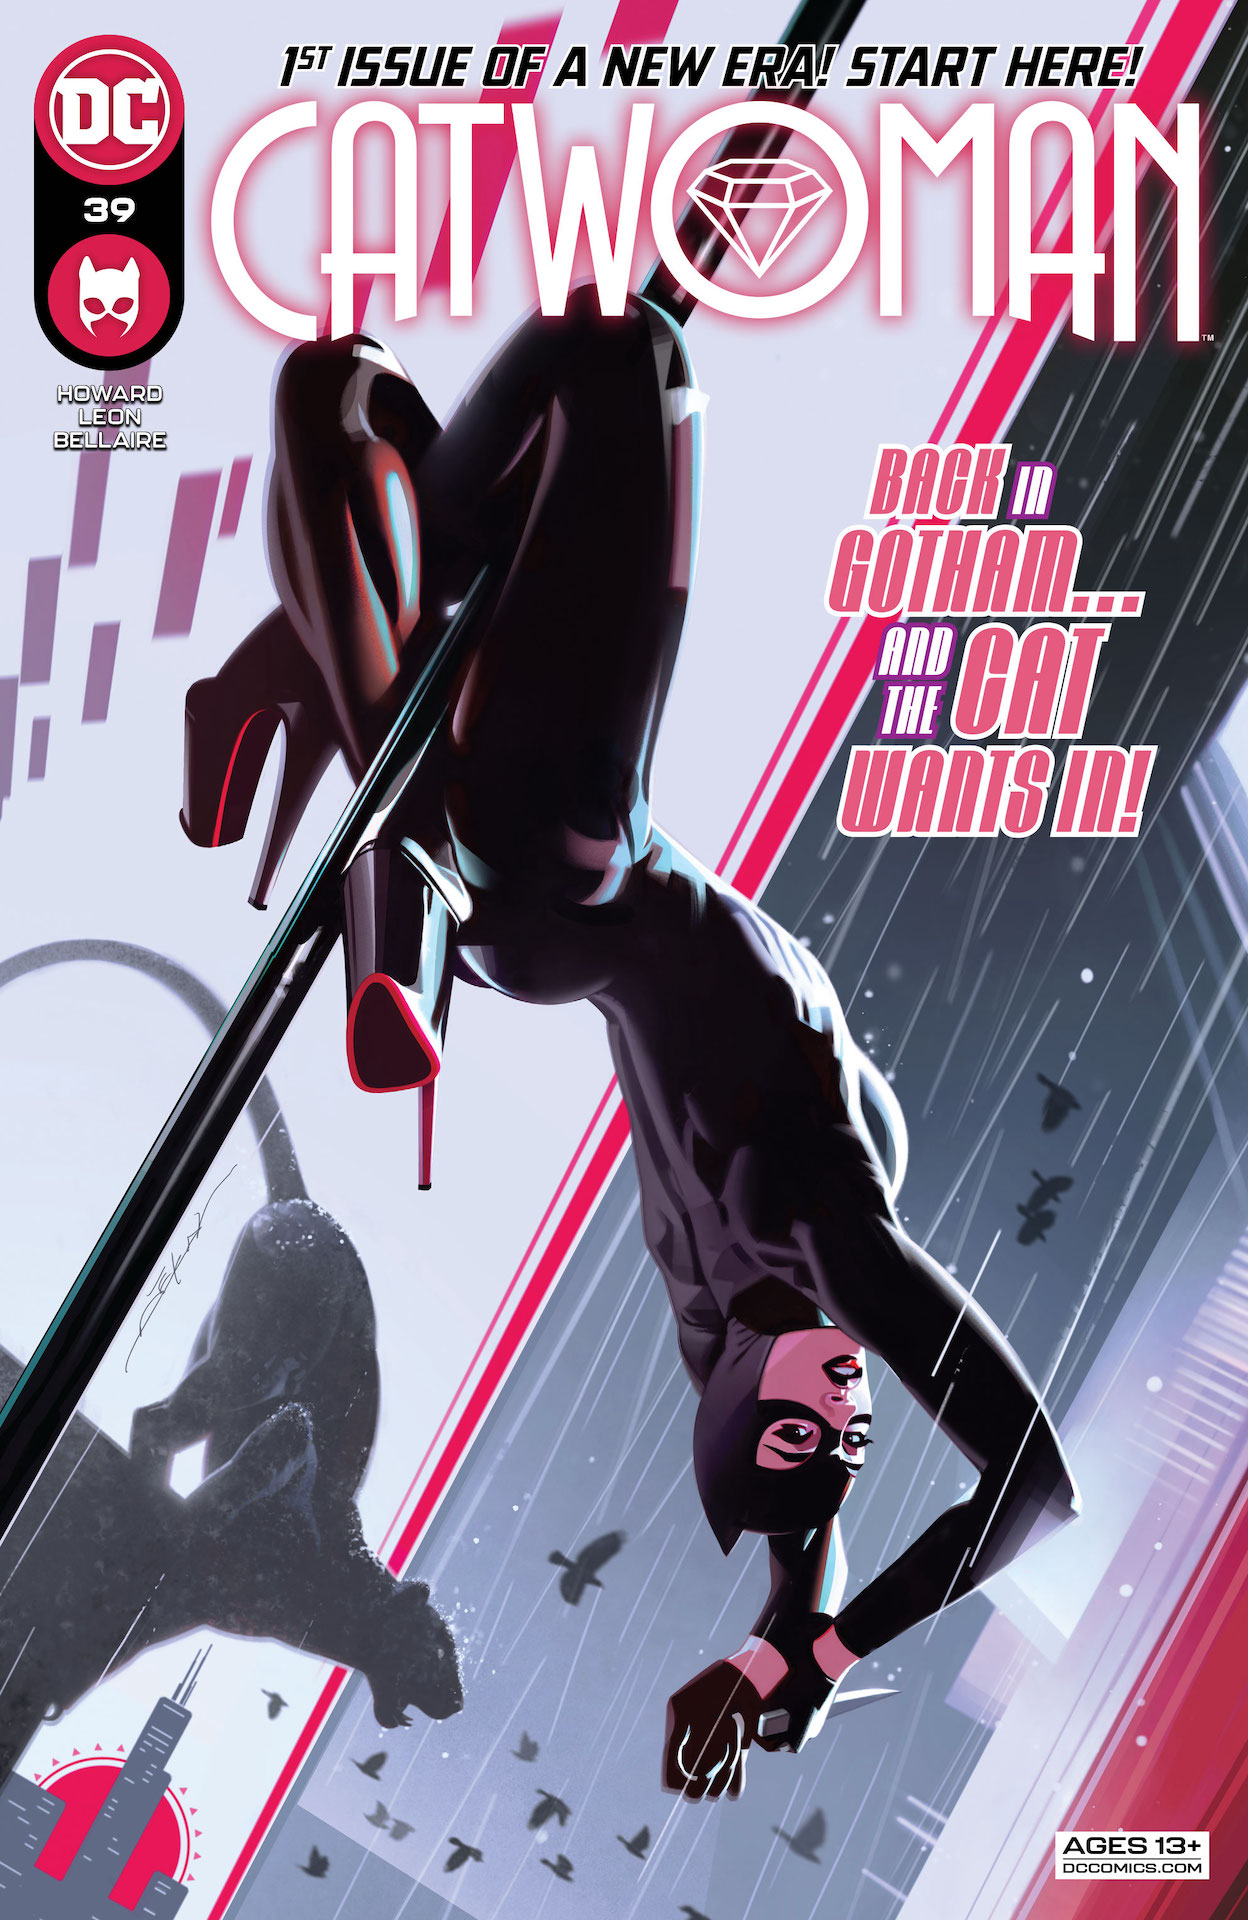 DC Preview: Catwoman #39